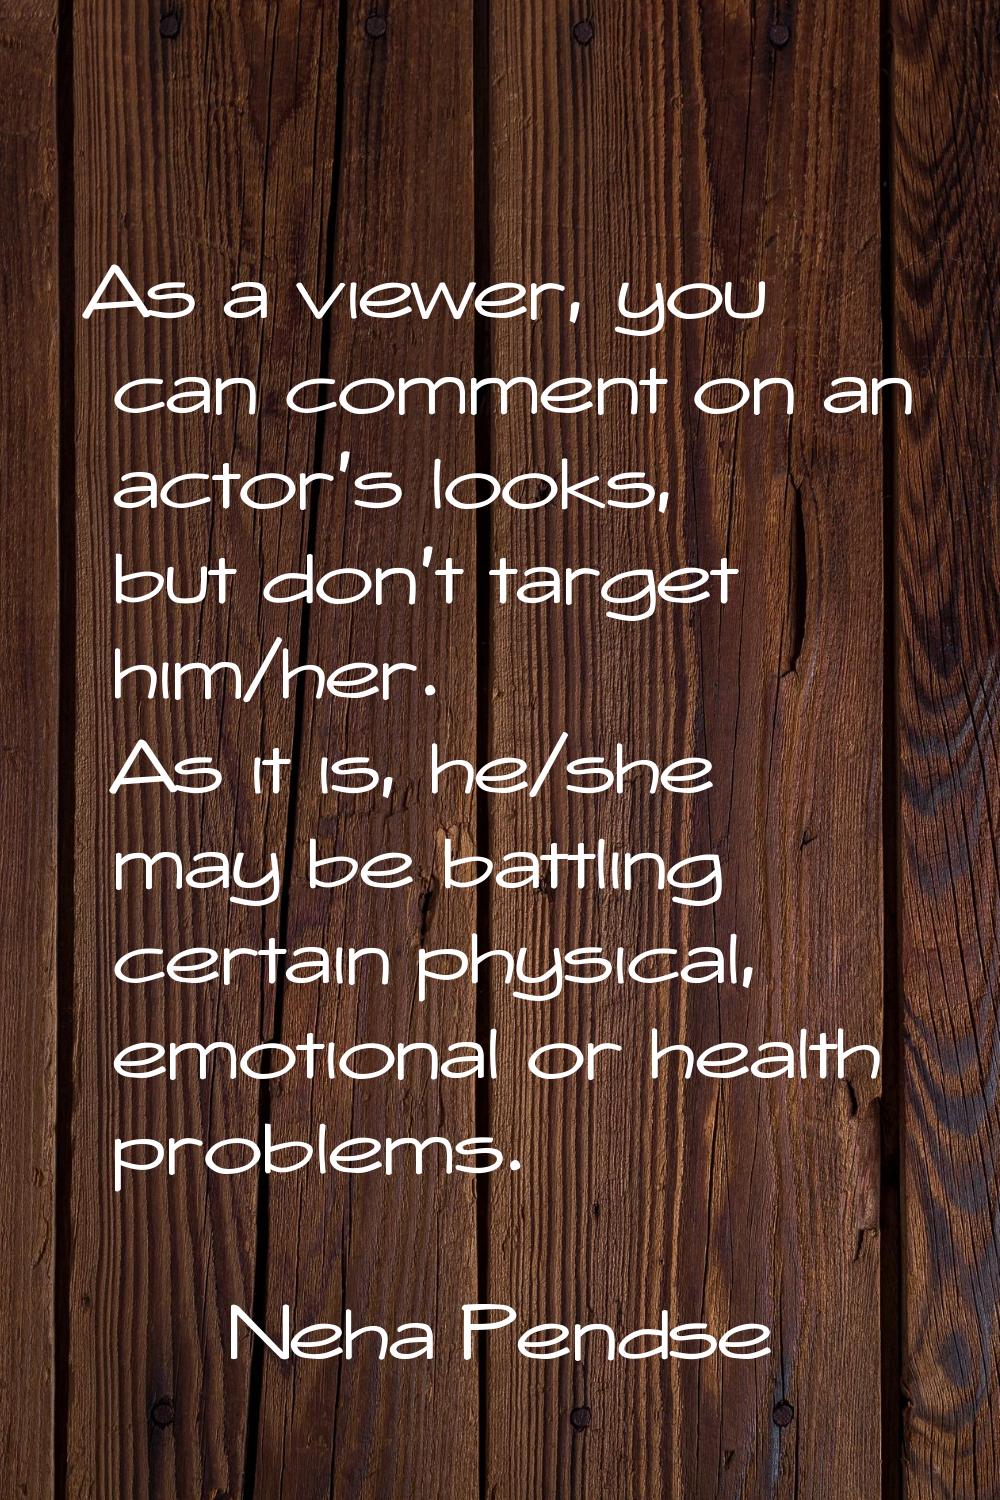 As a viewer, you can comment on an actor’s looks, but don’t target him/her. As it is, he/she may be